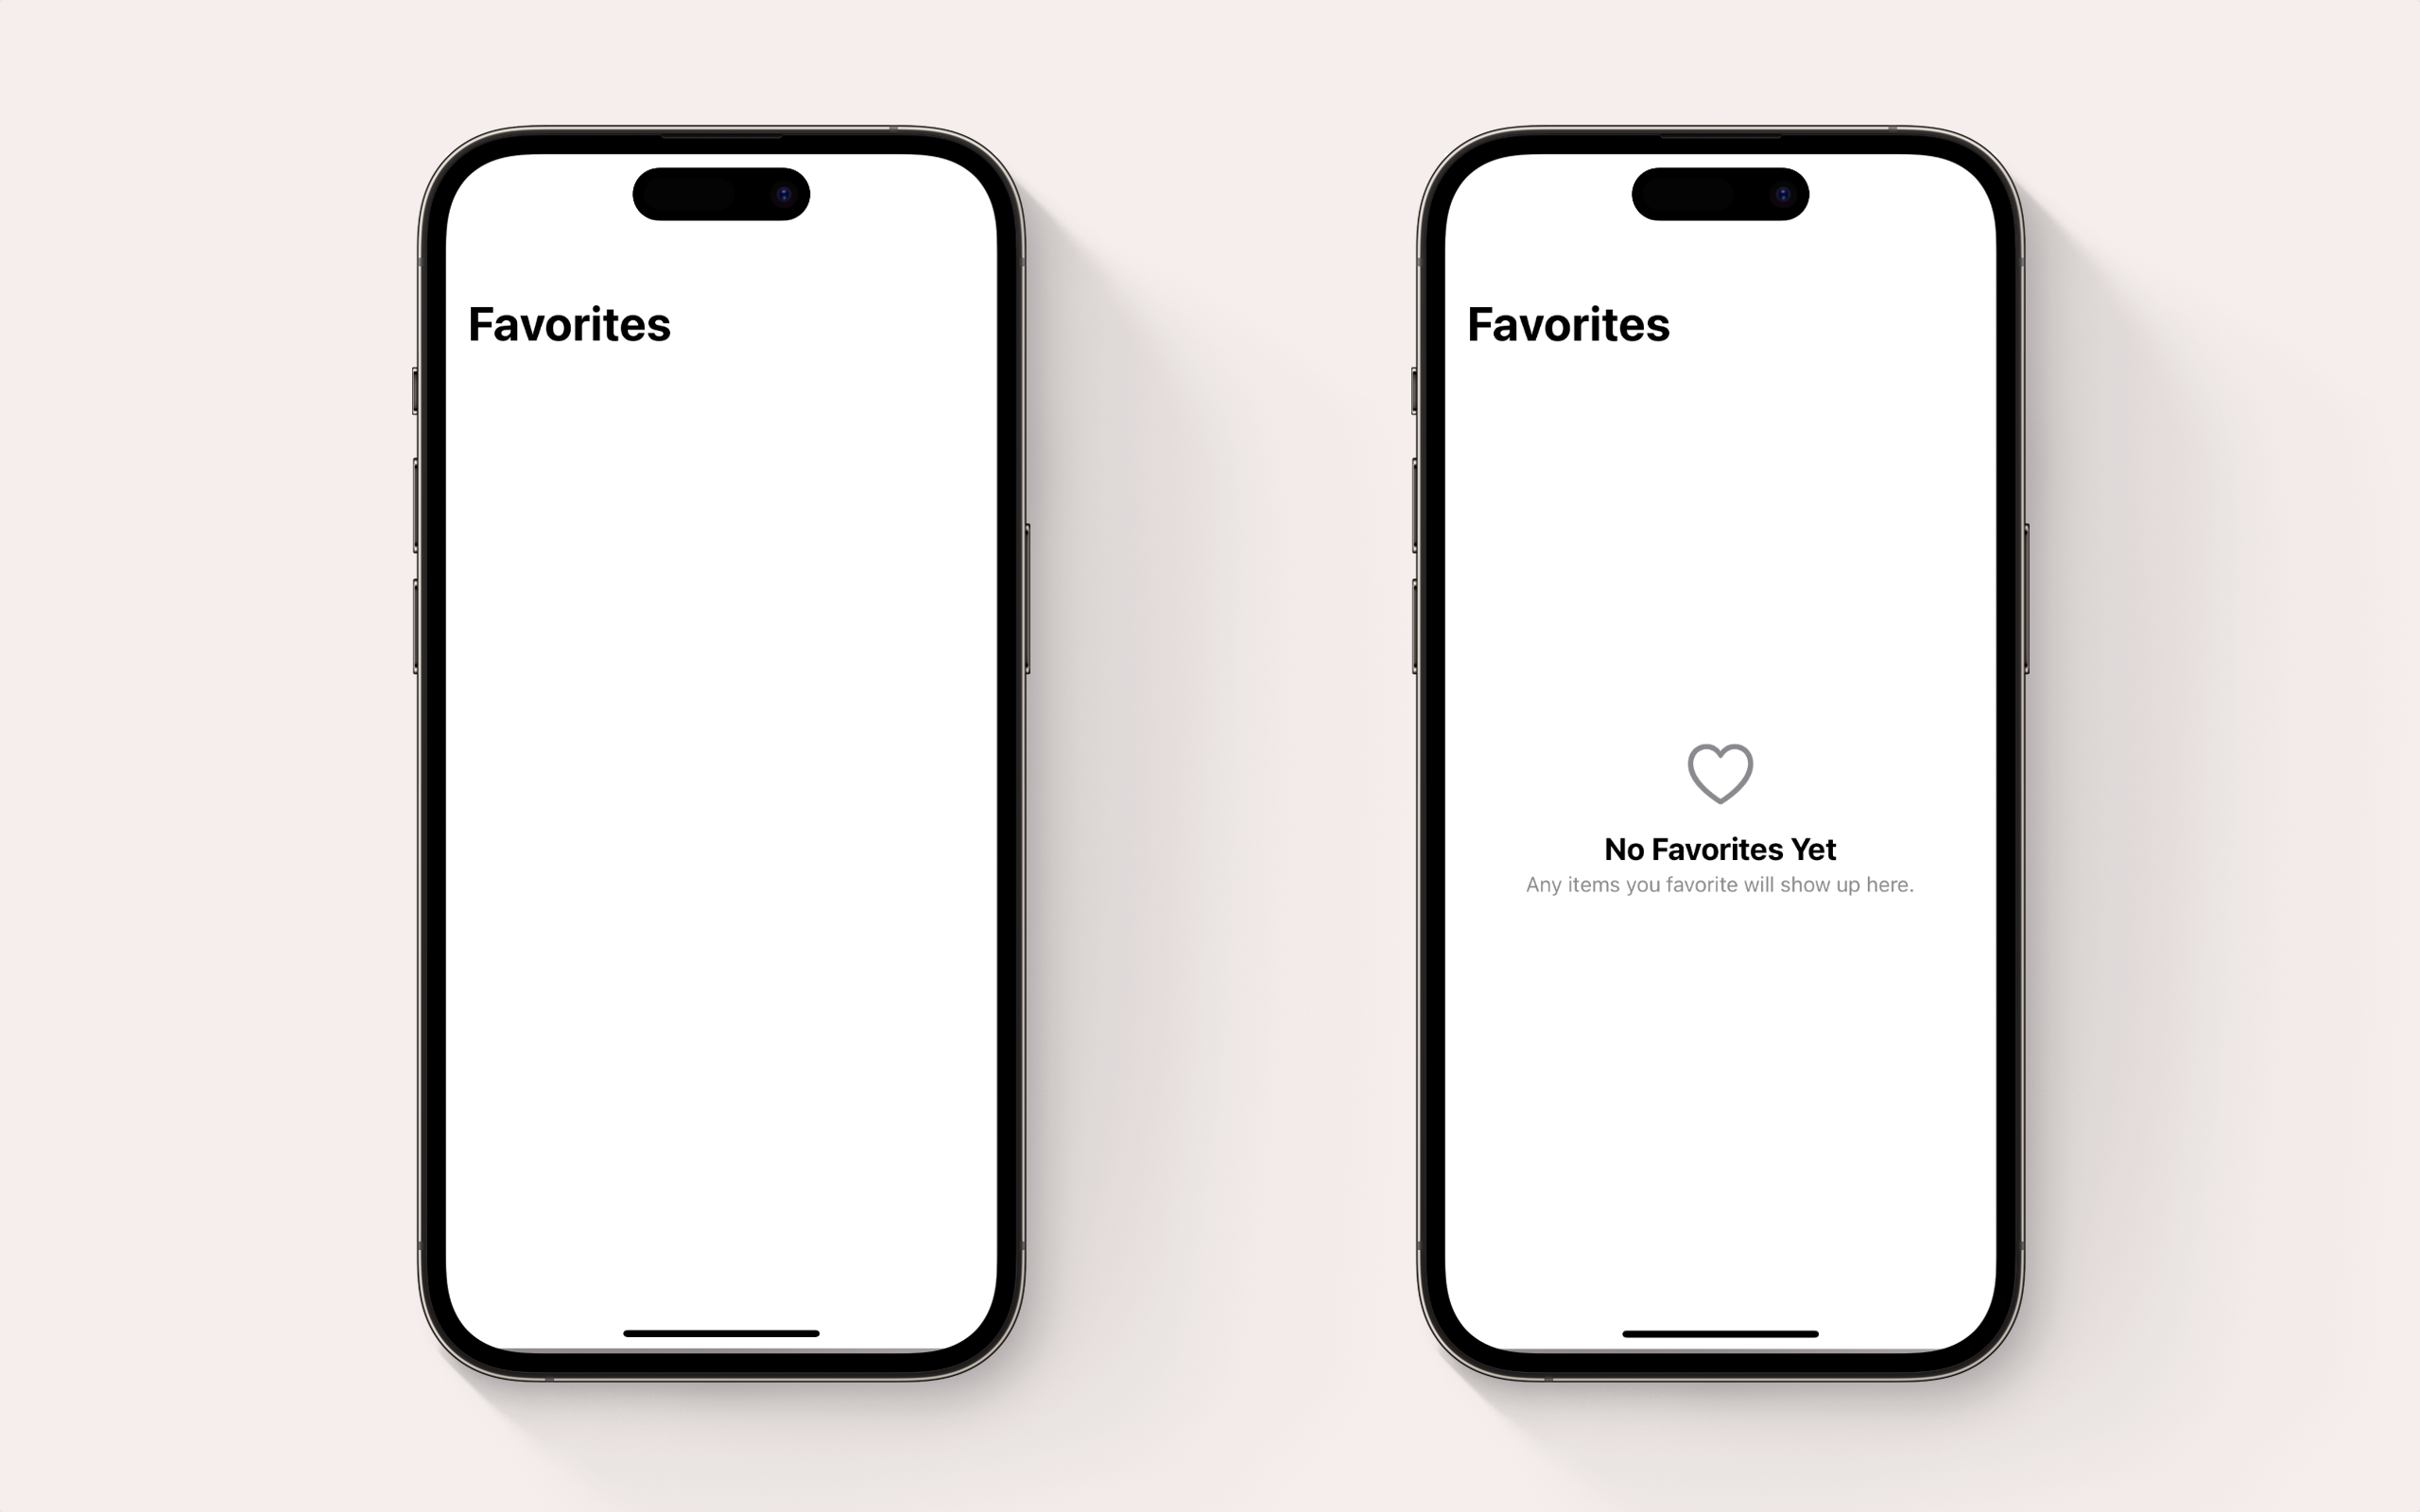 Two iPhones. One iPhone shows a navigation bar titled "Favorites" and then a blank screen. The other has the navigation title and a block of text centered in the middle of the screen: "No favorites yet. Any items you favorite will show up here."